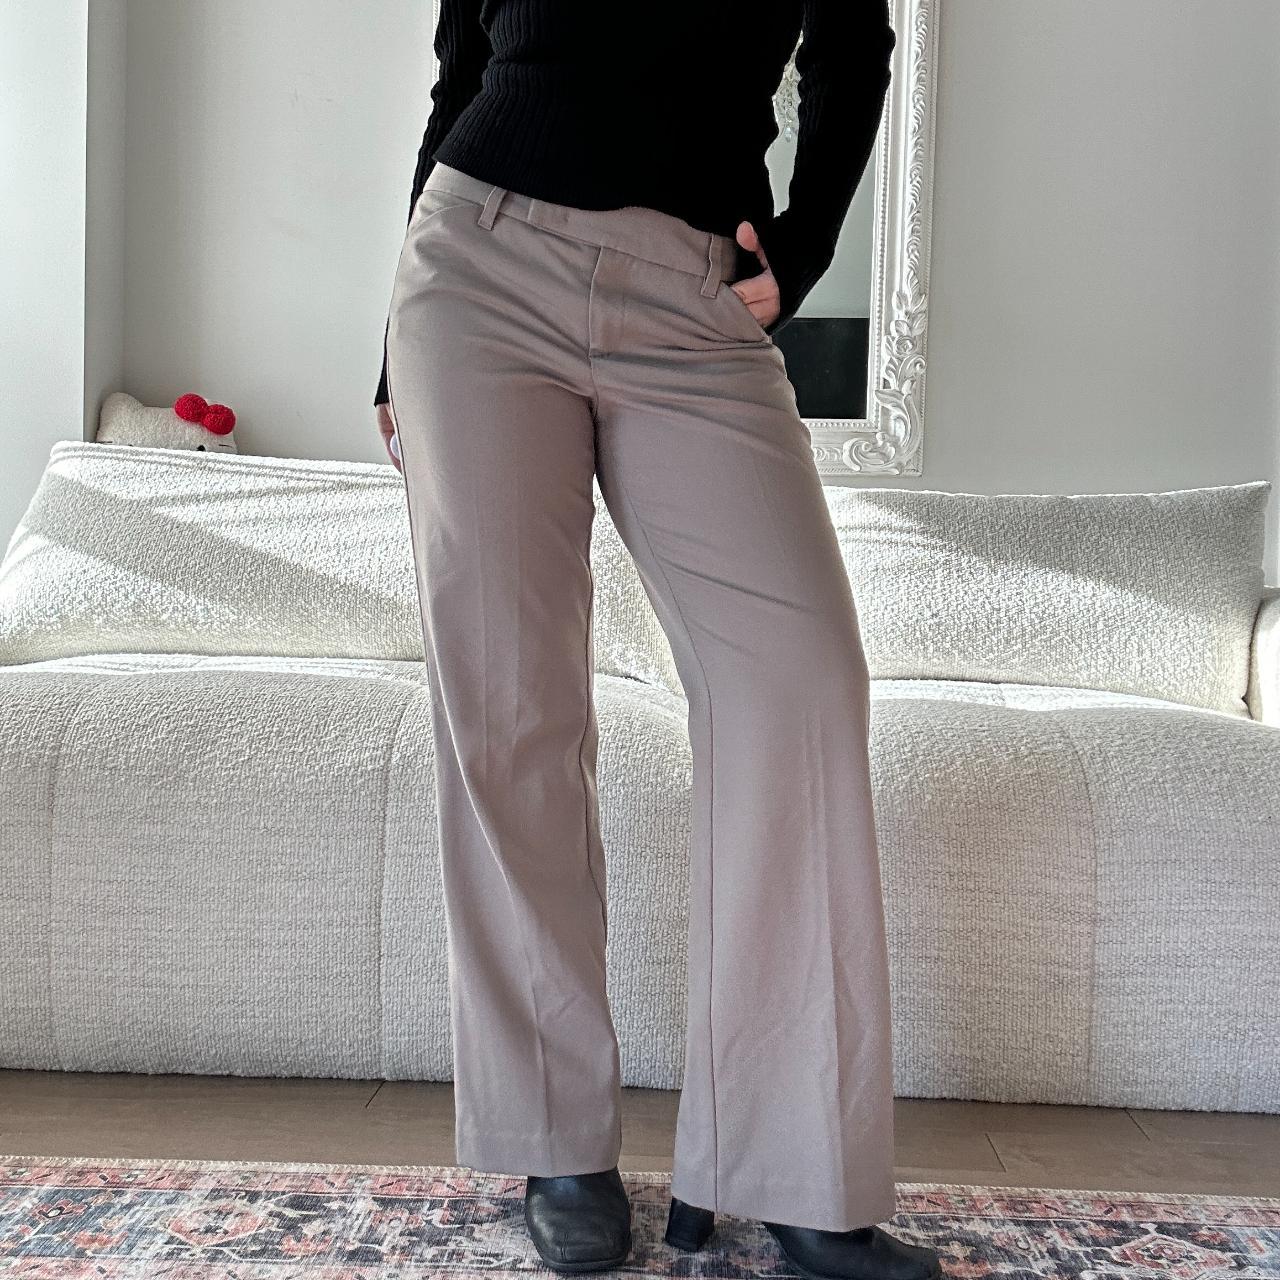 Beige trousers, low rise flared work pants - perfect - Depop